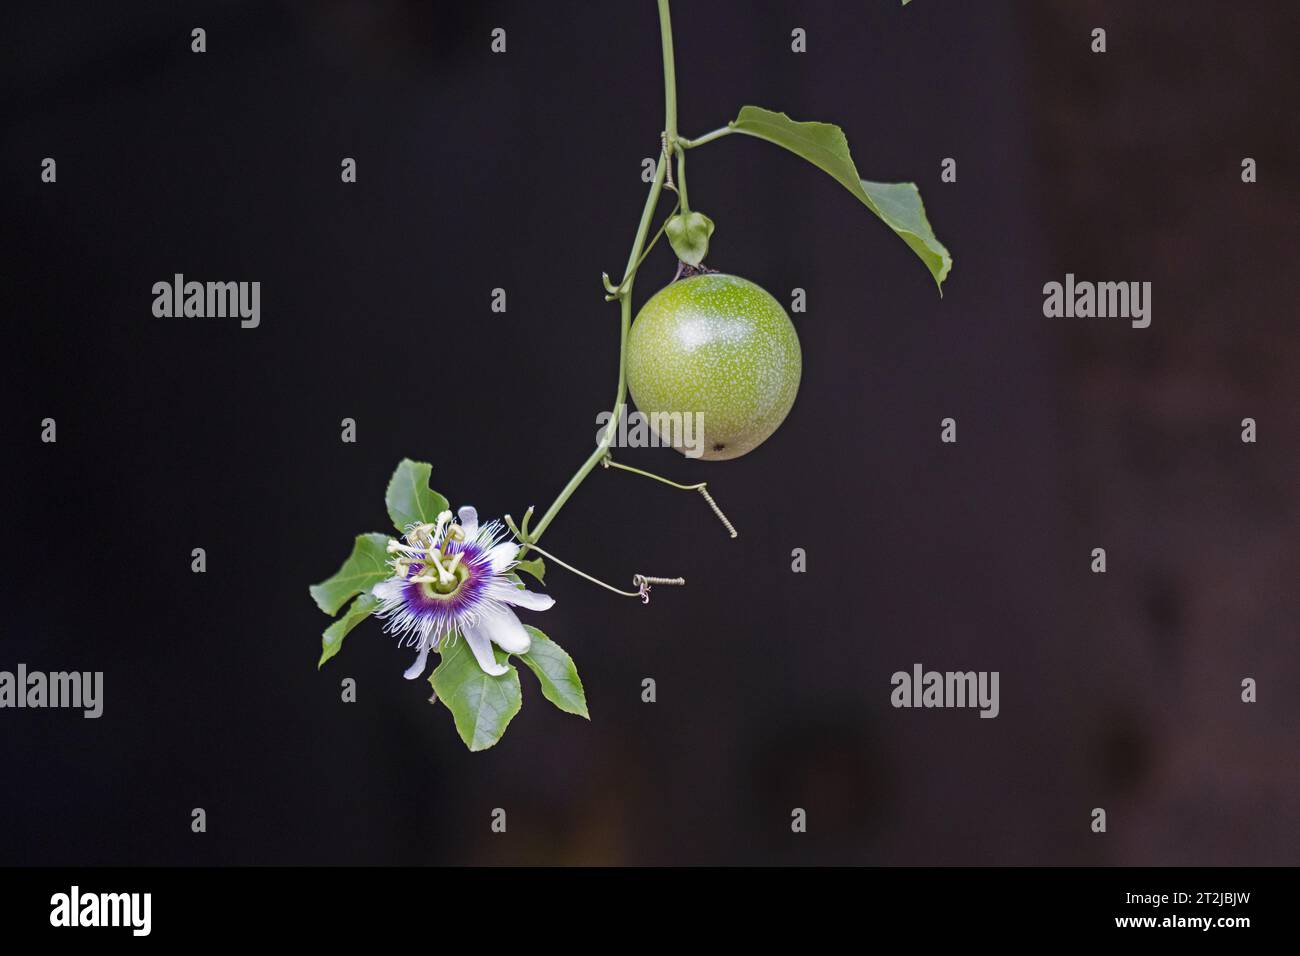 Unripe passion fruit and flower hanging on the plant. Passiflora edulis fruit, flower and laves on the vine with dark background. Stock Photo